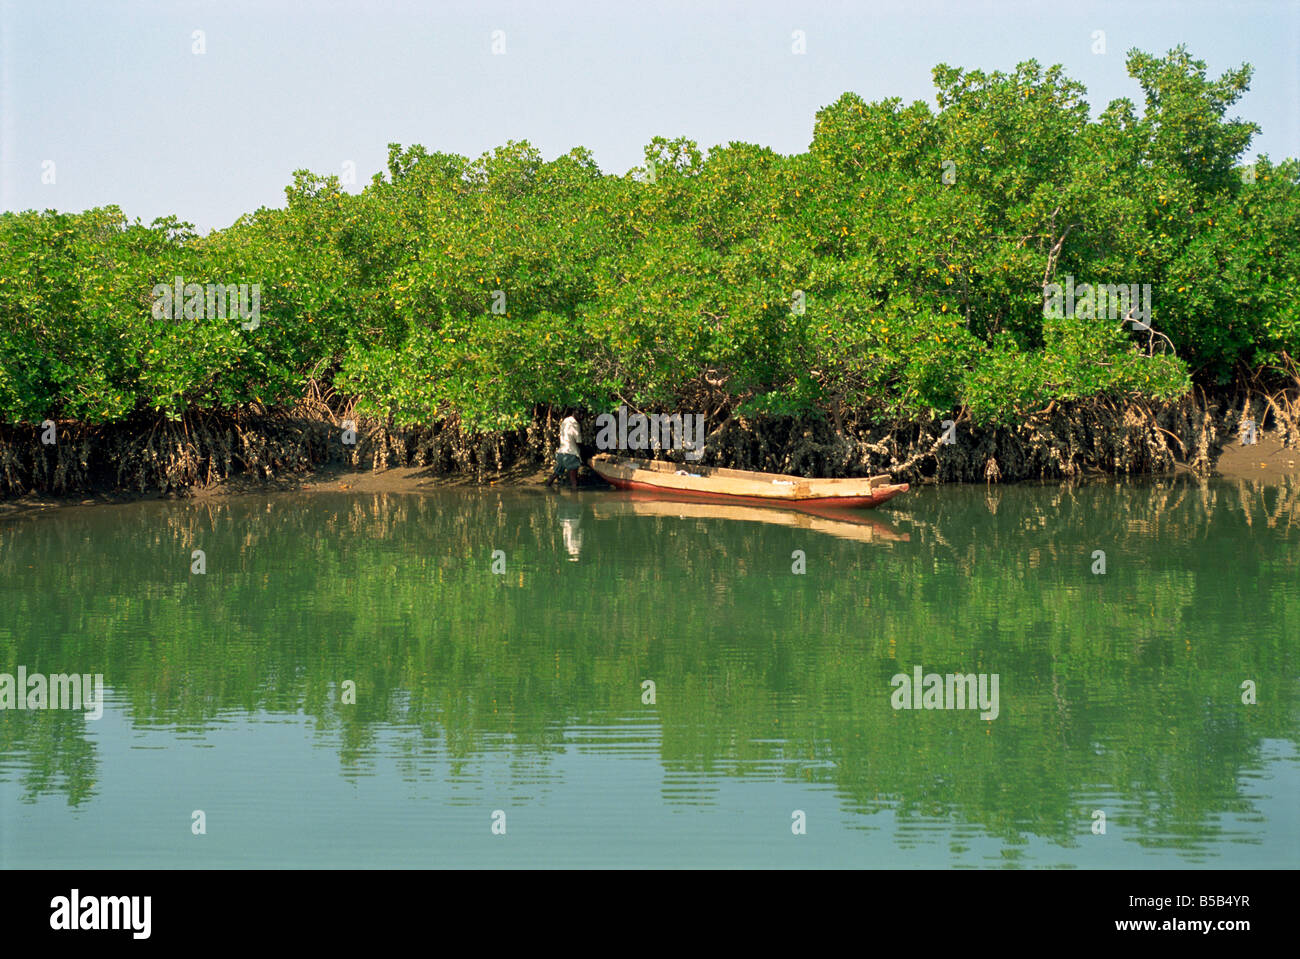 Harvesting oysters from mangroves near Makasutu, Gambia, West Africa, Africa Stock Photo